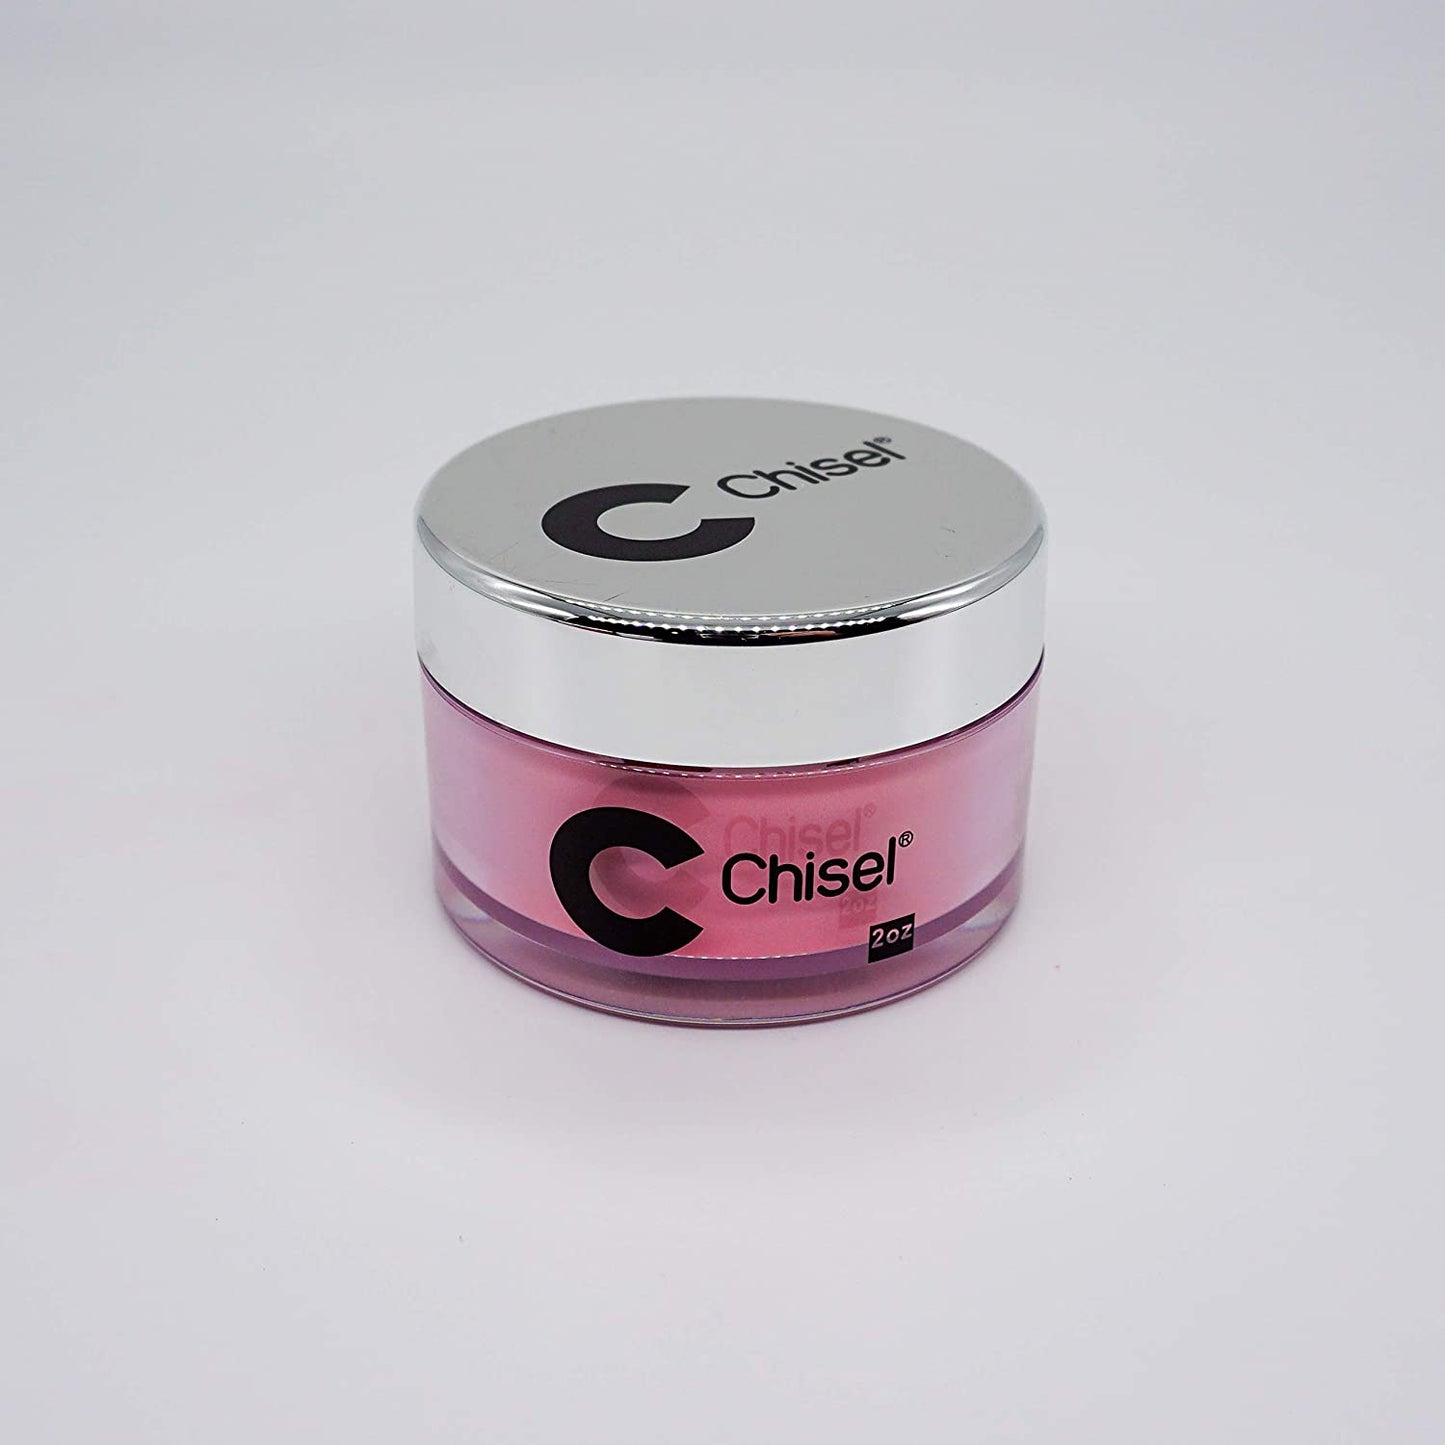 Chisel Nail Art Manicure 2 in 1 Acrylic & Dipping Powder Solid #017